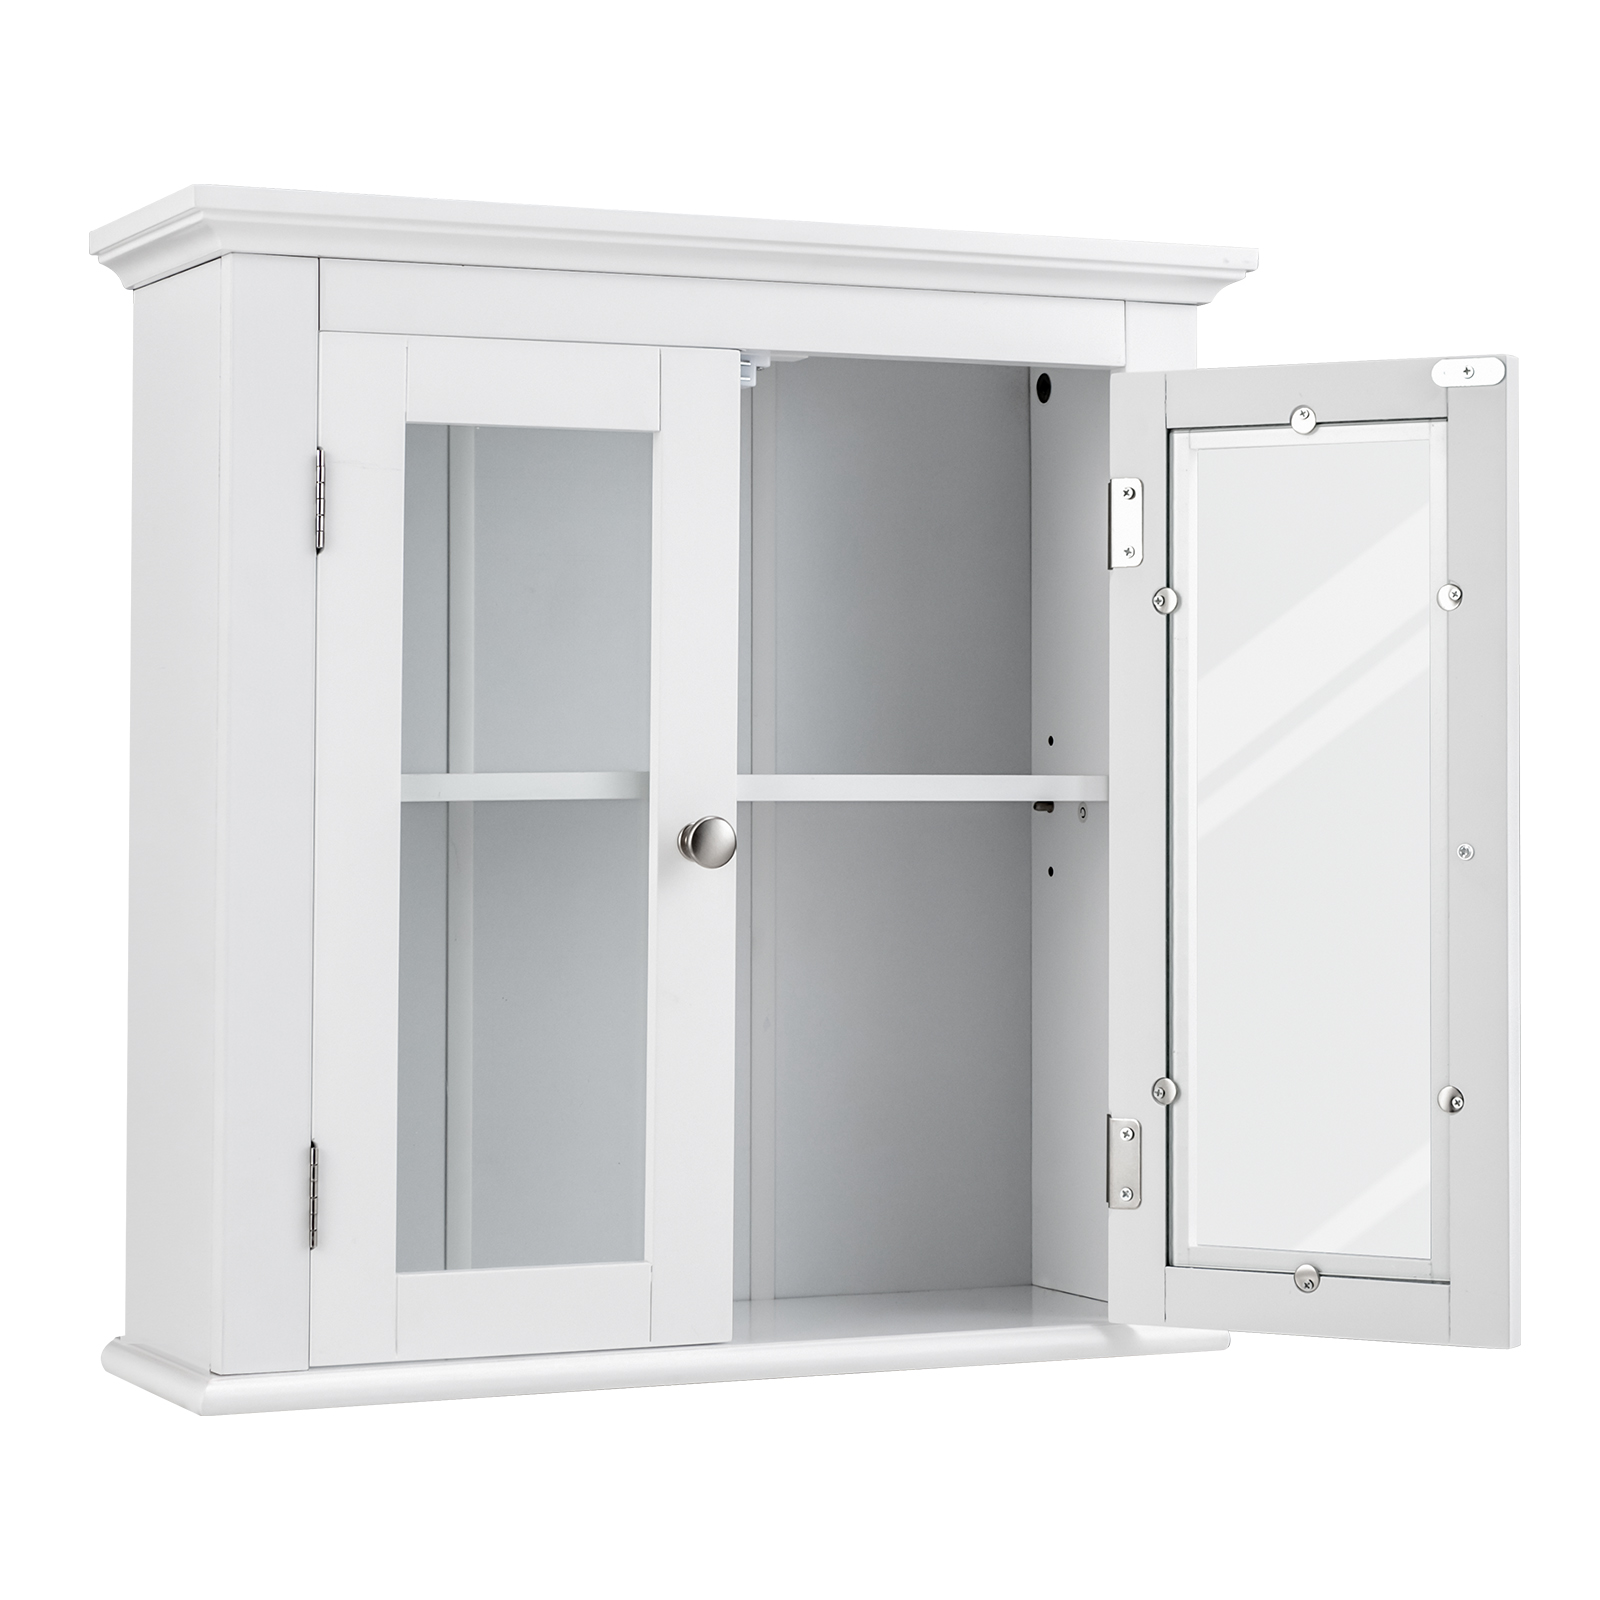 Wall_Mounted_Door_Cabinet_with_3Level_Adjustable_Shelf_and_Double_Tempered_Glass_Doors_WH-7.jpg